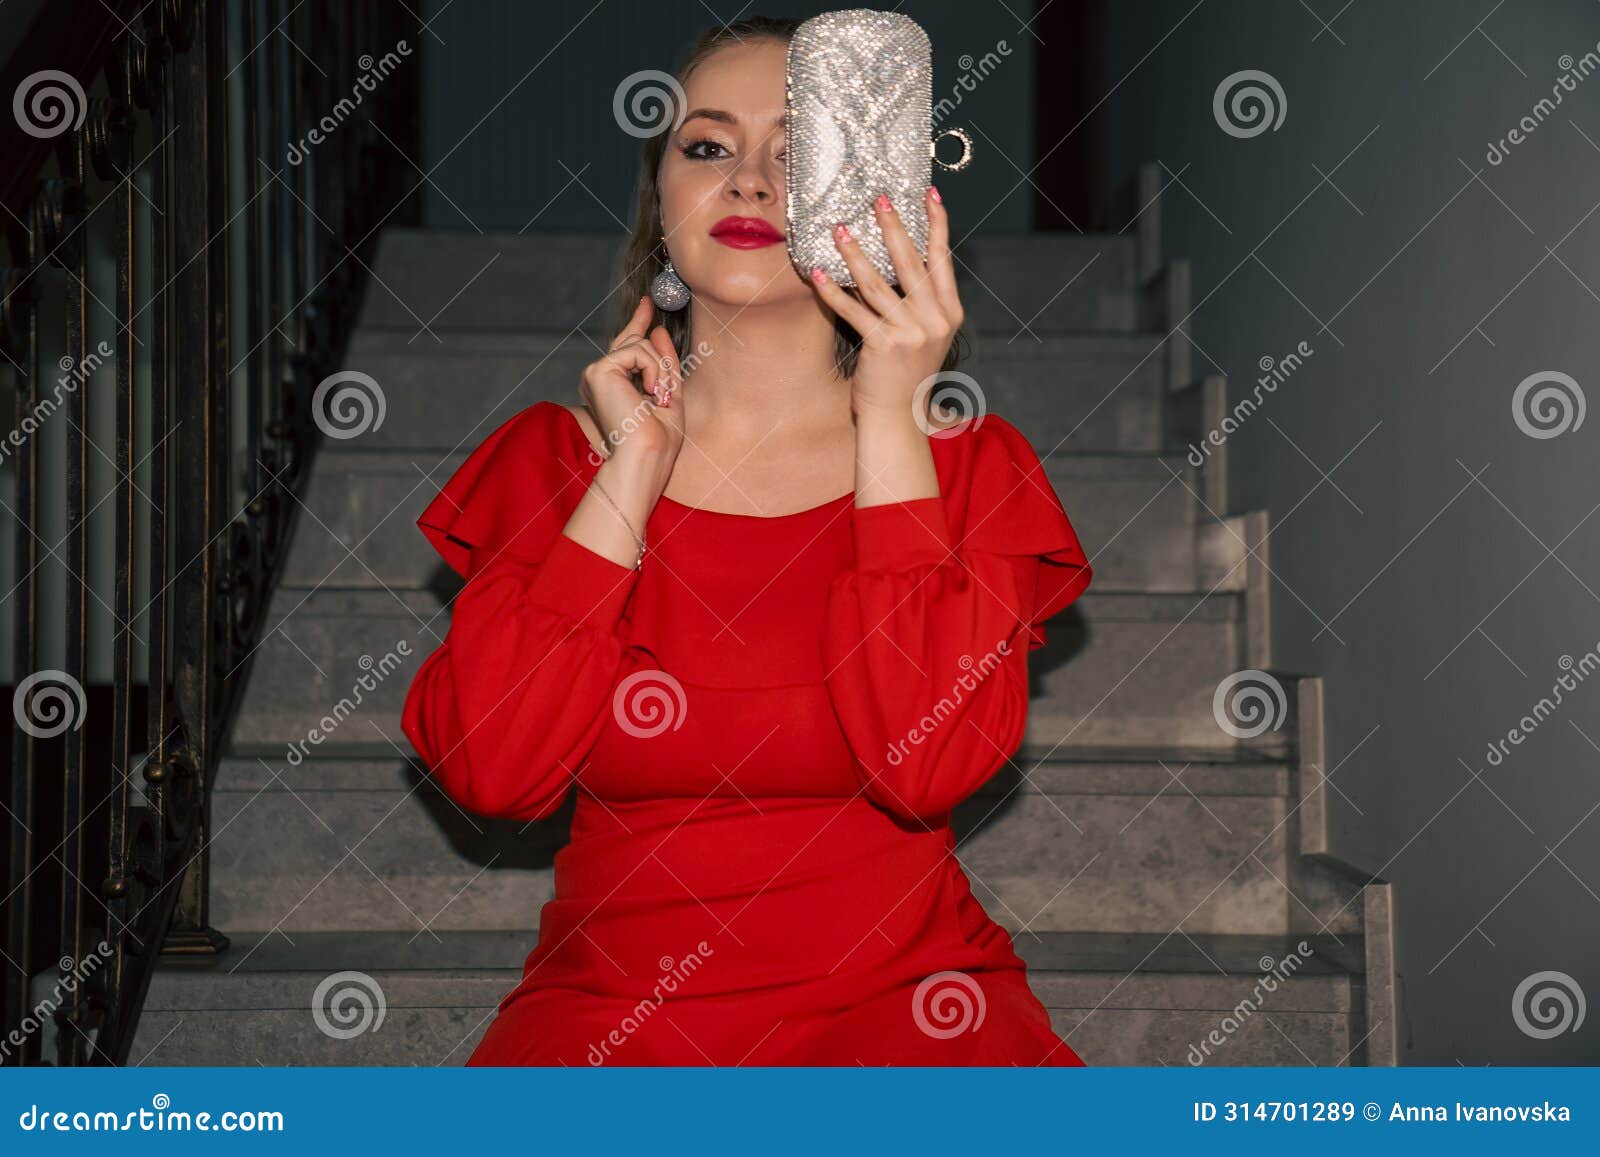 glamourous young beautiful woman in red dress, with silver bag and silver earrings is sitting on the staircase